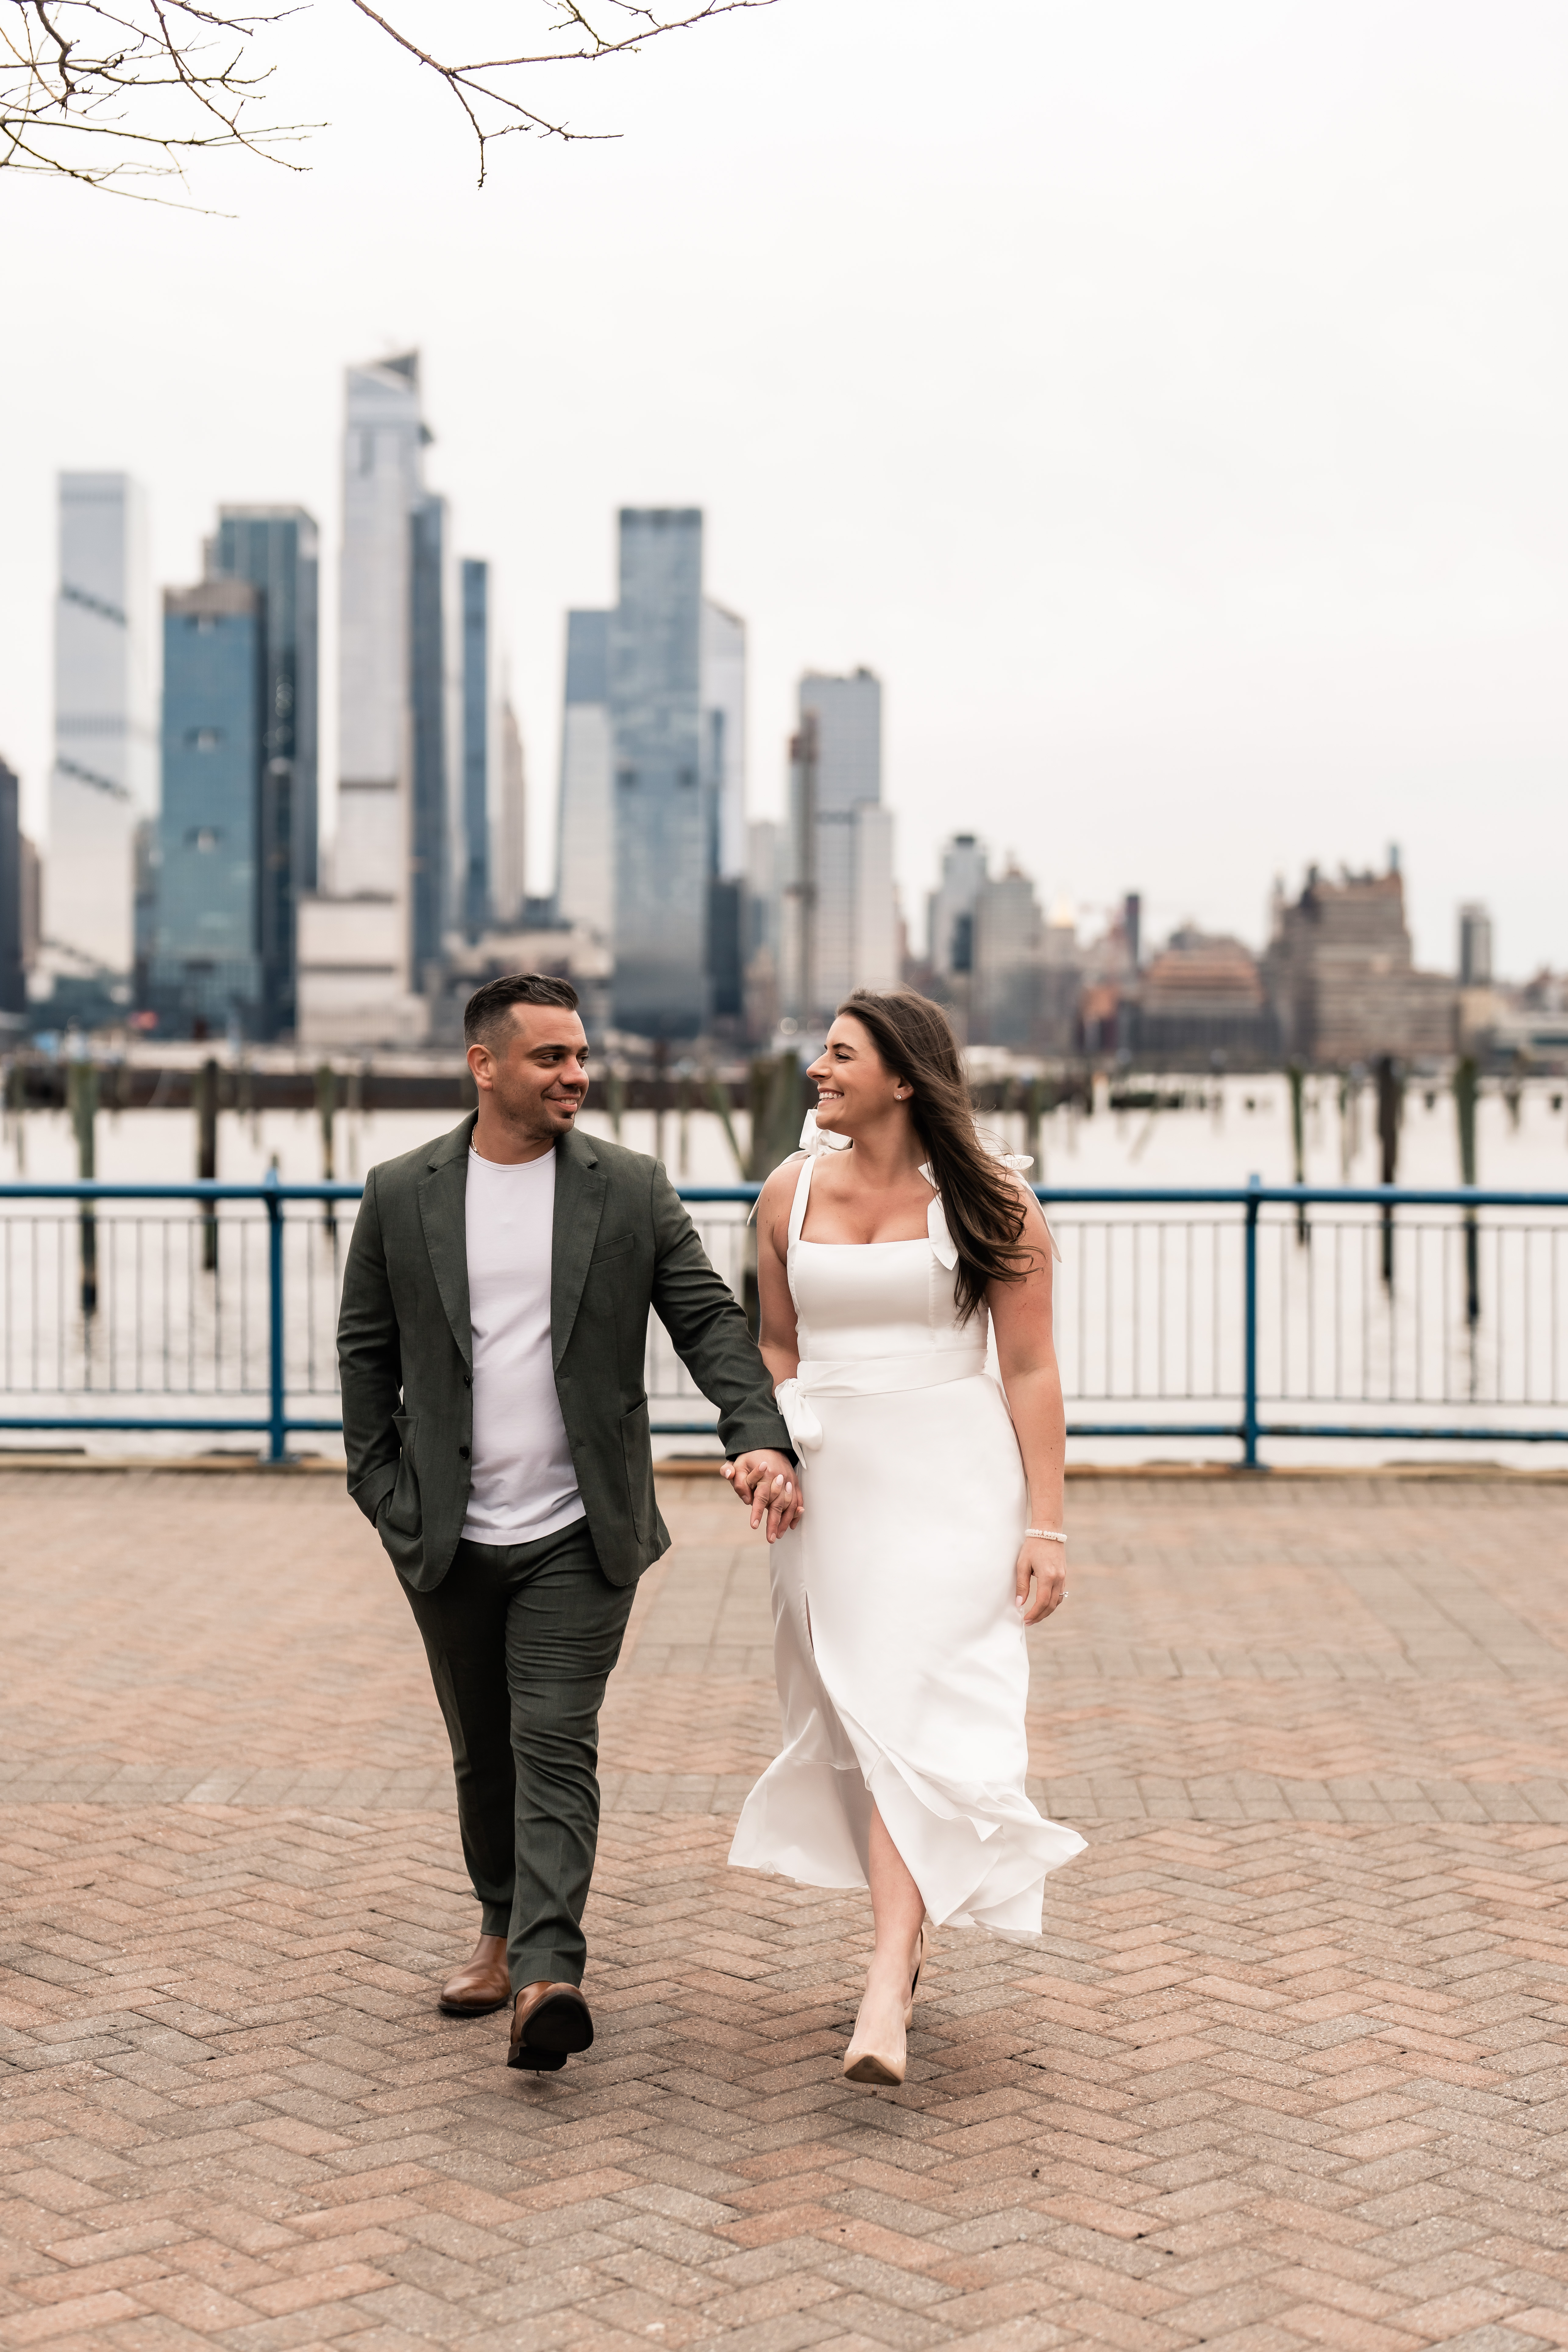 Hoboken New Jersey Wedding Photographer, Hoboken New Jersey Engagement Session, NJ Engagement Session, Hoboken  Wedding Photographer, New Jersey Wedding Venues, NJ Wedding Photographer, Unique Wedding Ideas, Wedding Planning, Save The Date Photos, Engaged couple holding hands and walking towards photographer as they smile and look at each other with New York City in the background 